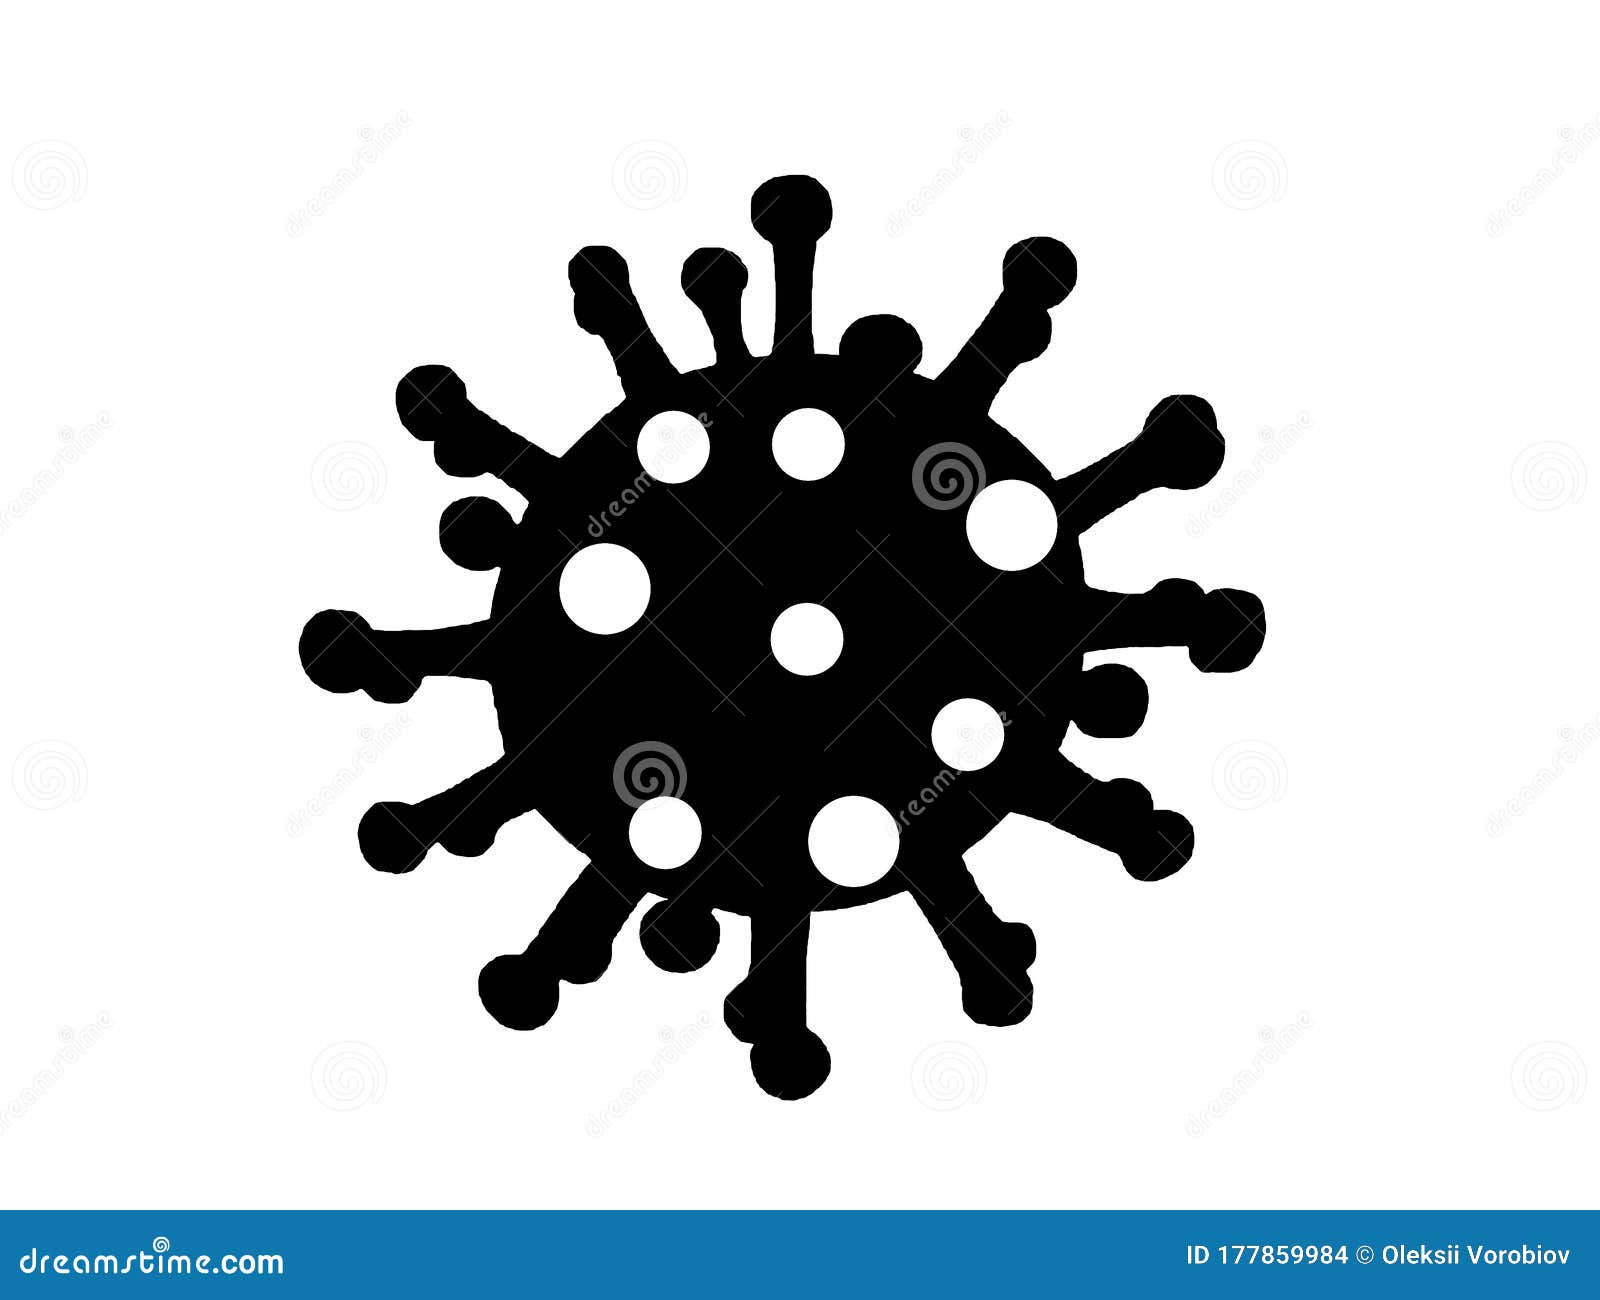 Graphical Coronavirus Icon Isolated on White, Vector Silhouette of ...